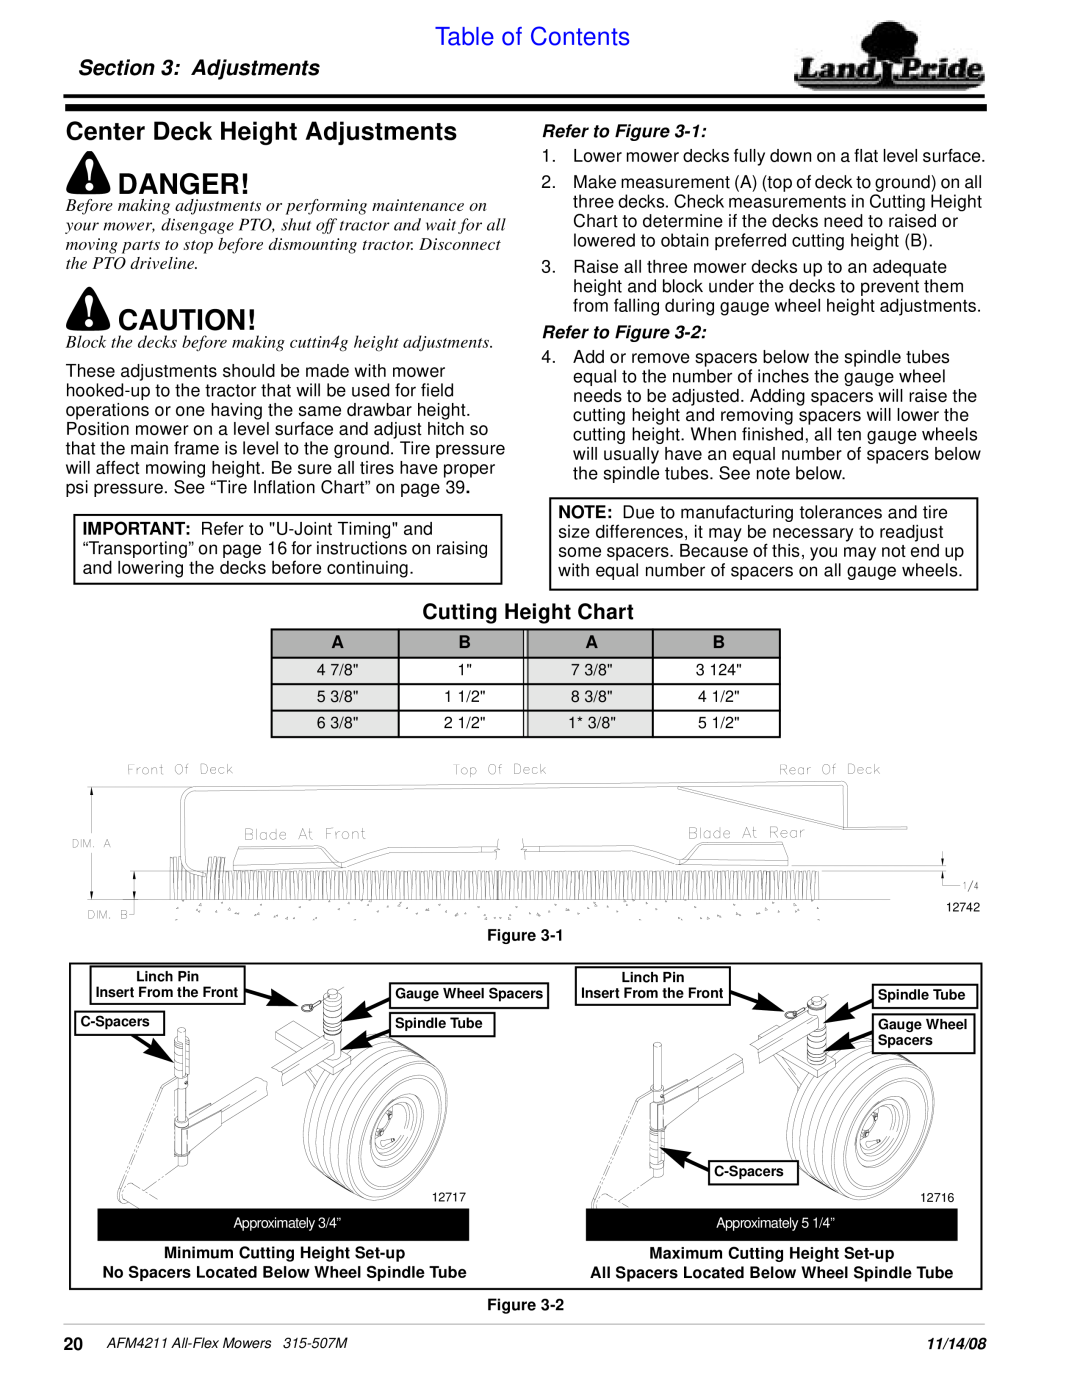 Land Pride AFM4211 manual Center Deck Height Adjustments, Cutting Height Chart, Danger, Table of Contents, Refer to Figure 